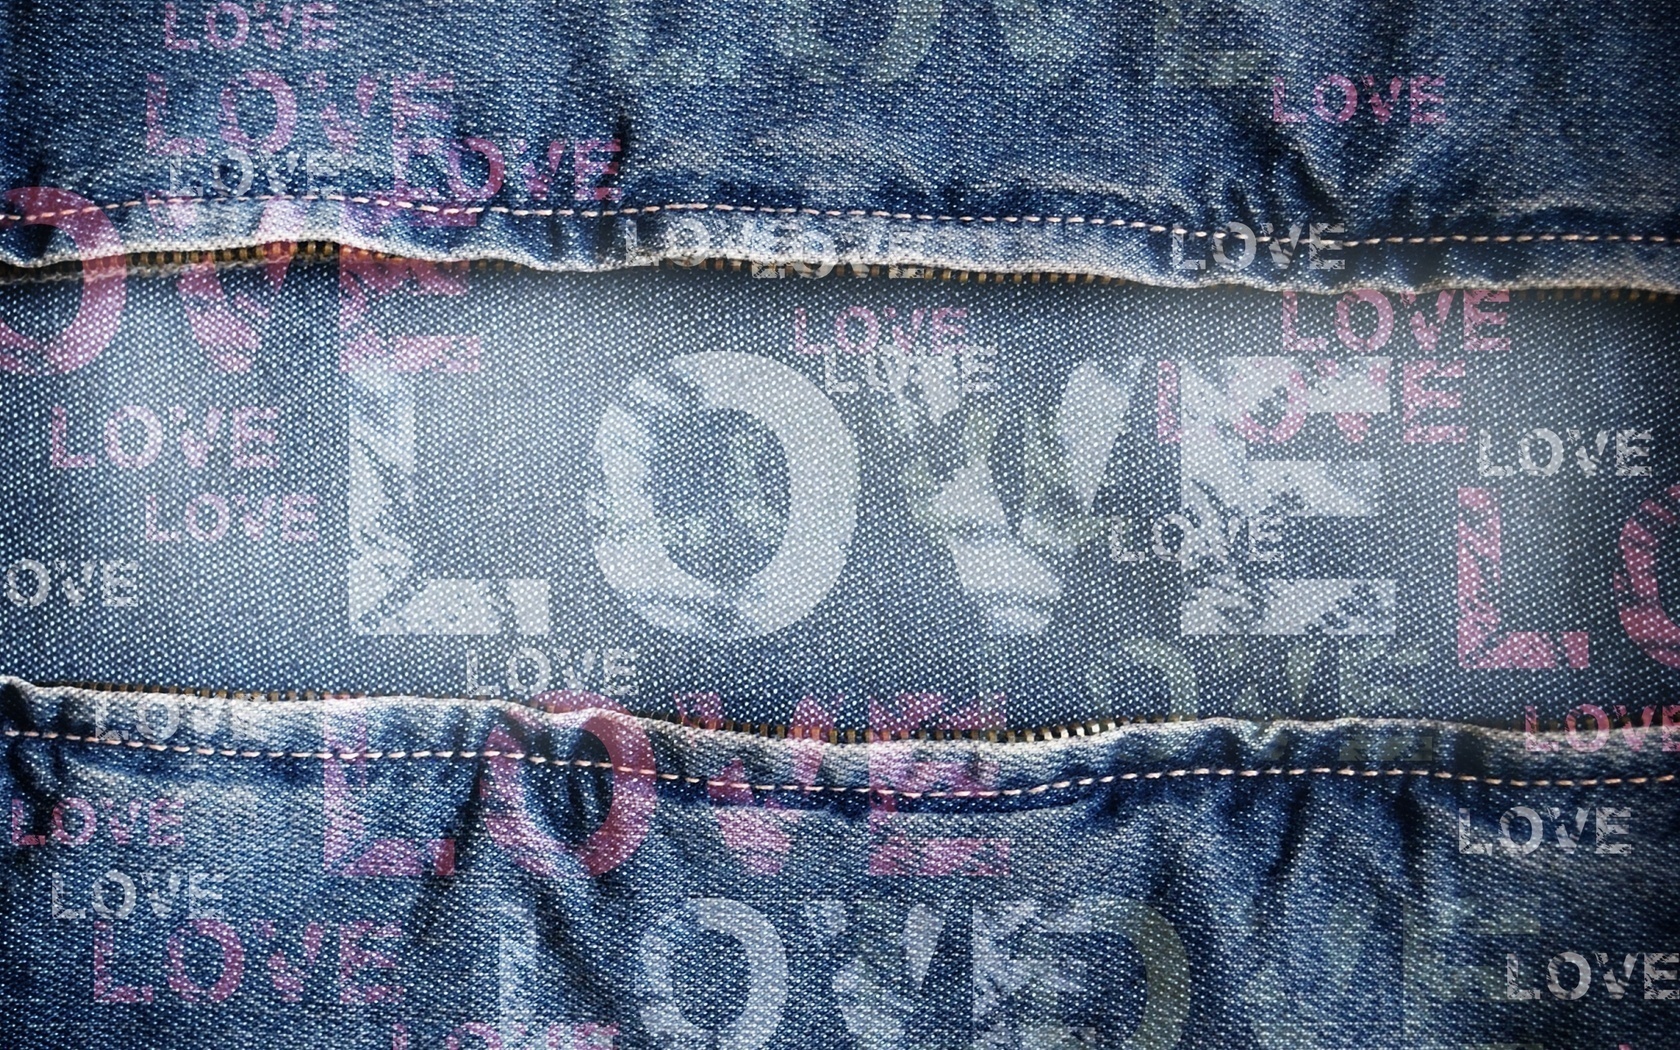 Love Jeans Wallpapers 1680x1050 1128246